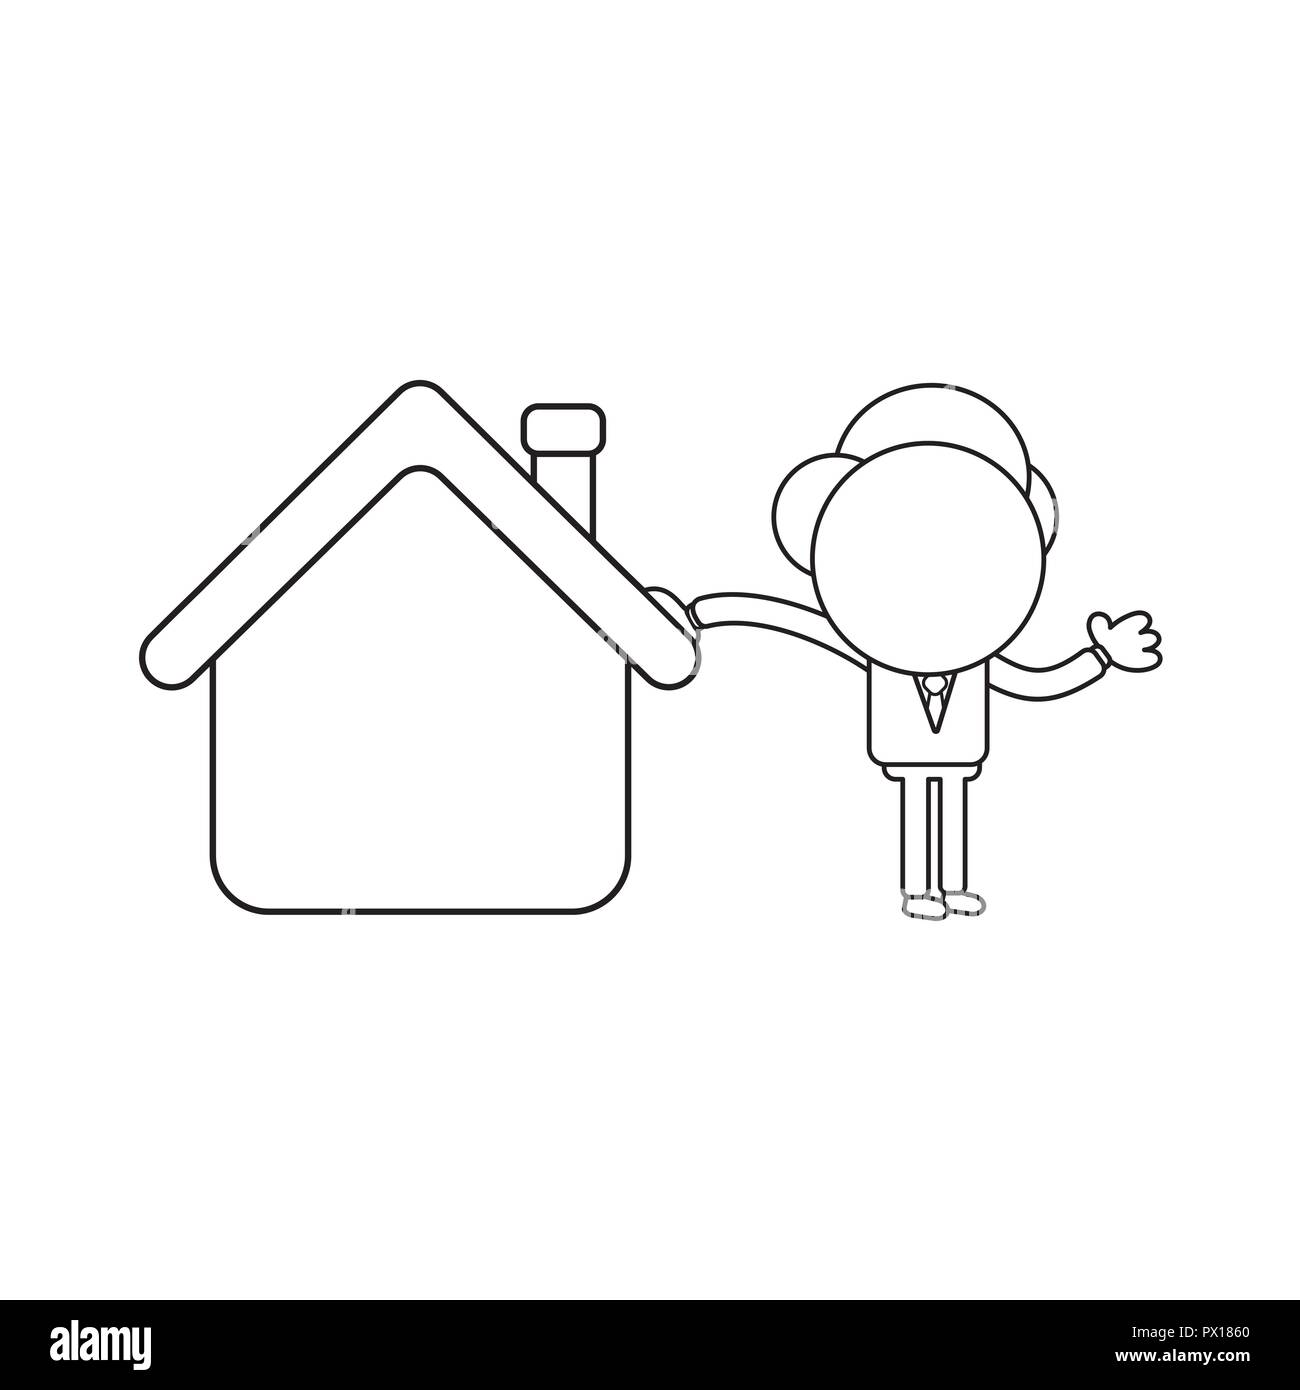 Vector illustration concept of businessman character leaning on house. Black outline. Stock Vector